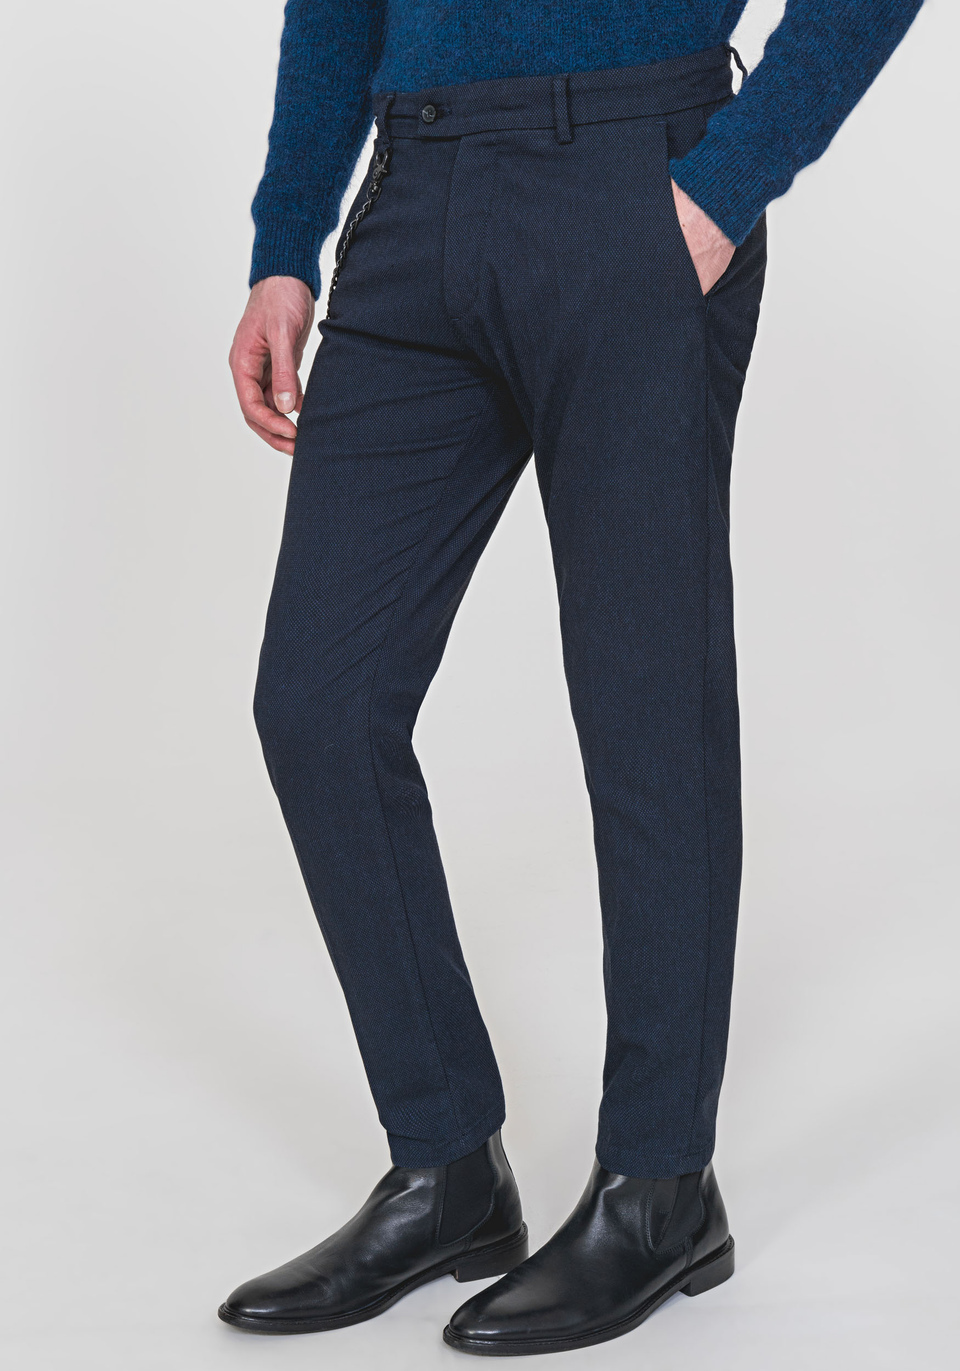 SLIM-FIT “KERR” TROUSERS MADE OF STRETCH COTTON WITH MICRO-PATTERN - Antony Morato Online Shop